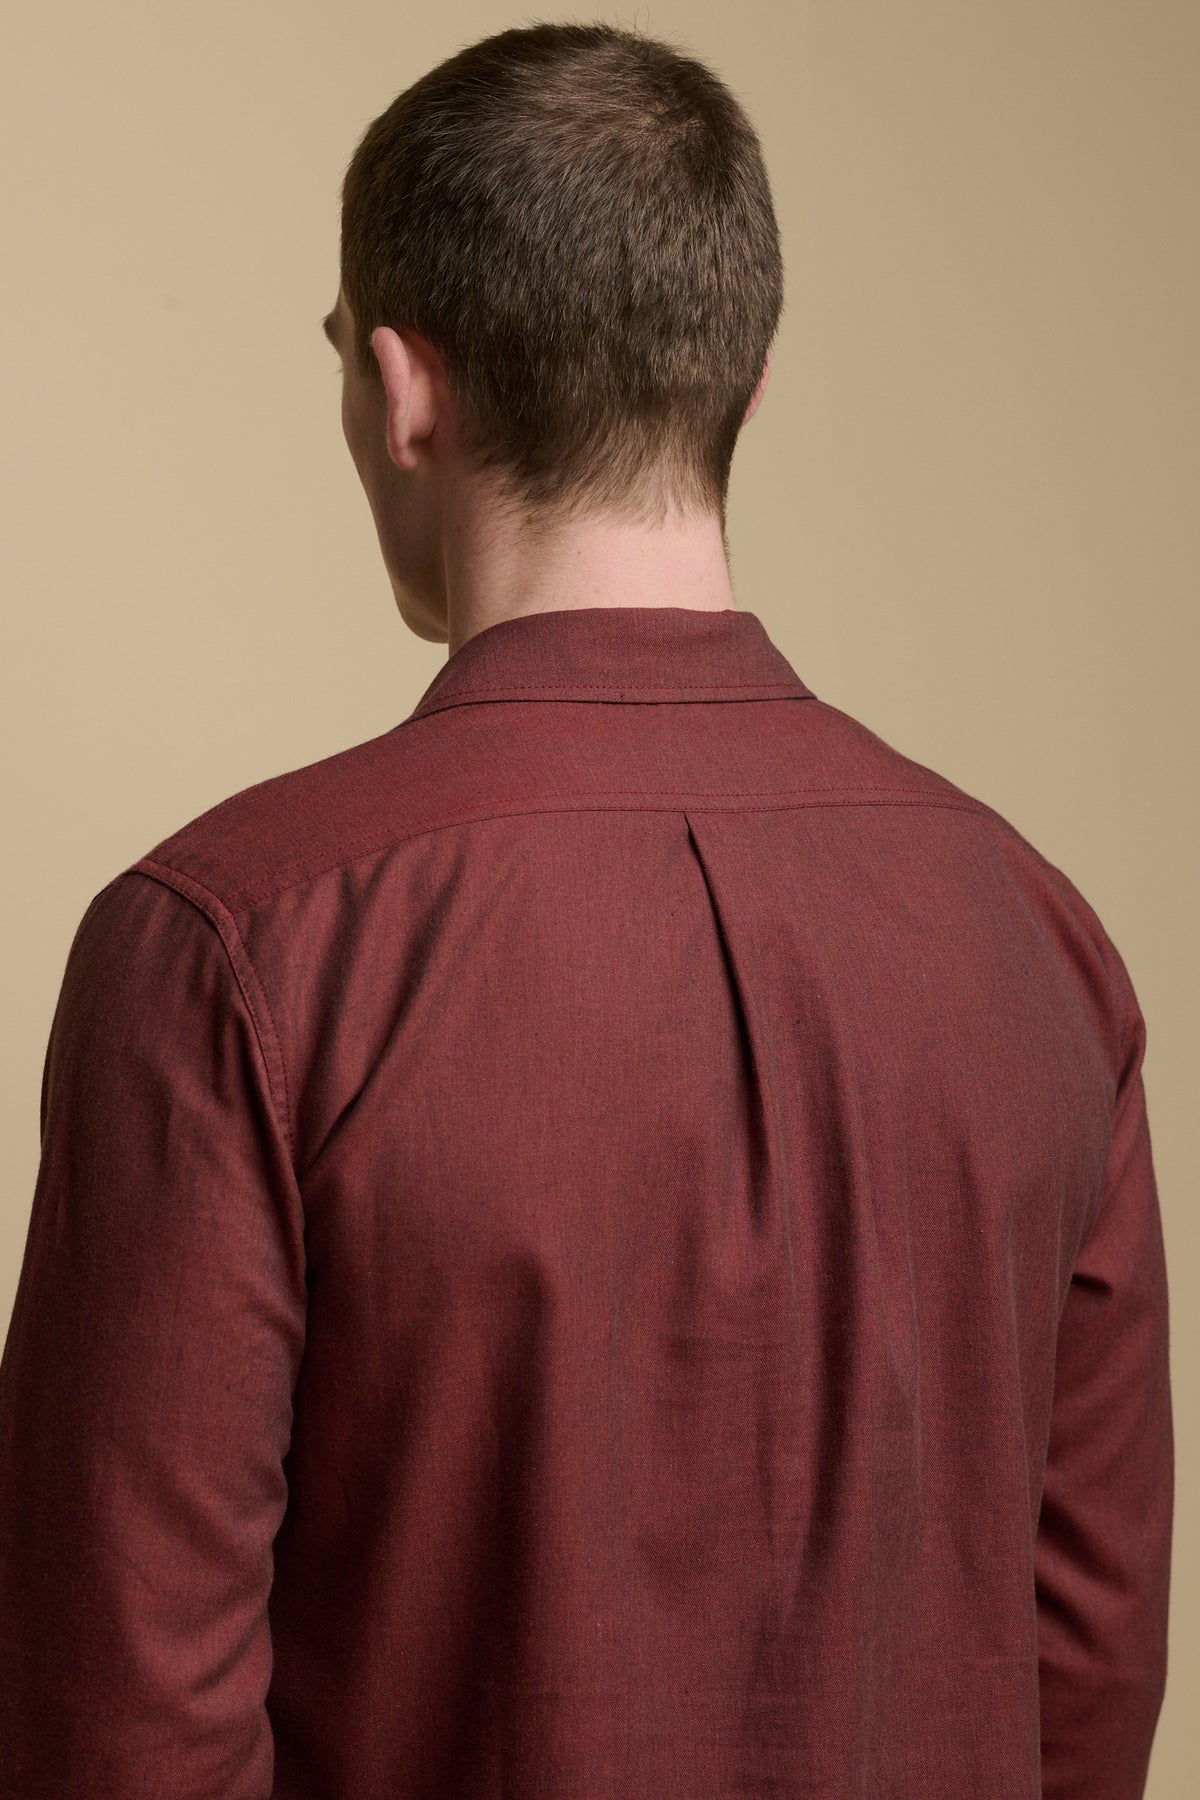 
            Close up of the back of brunet males shoulders wearing Oli shirt, back pleat detail